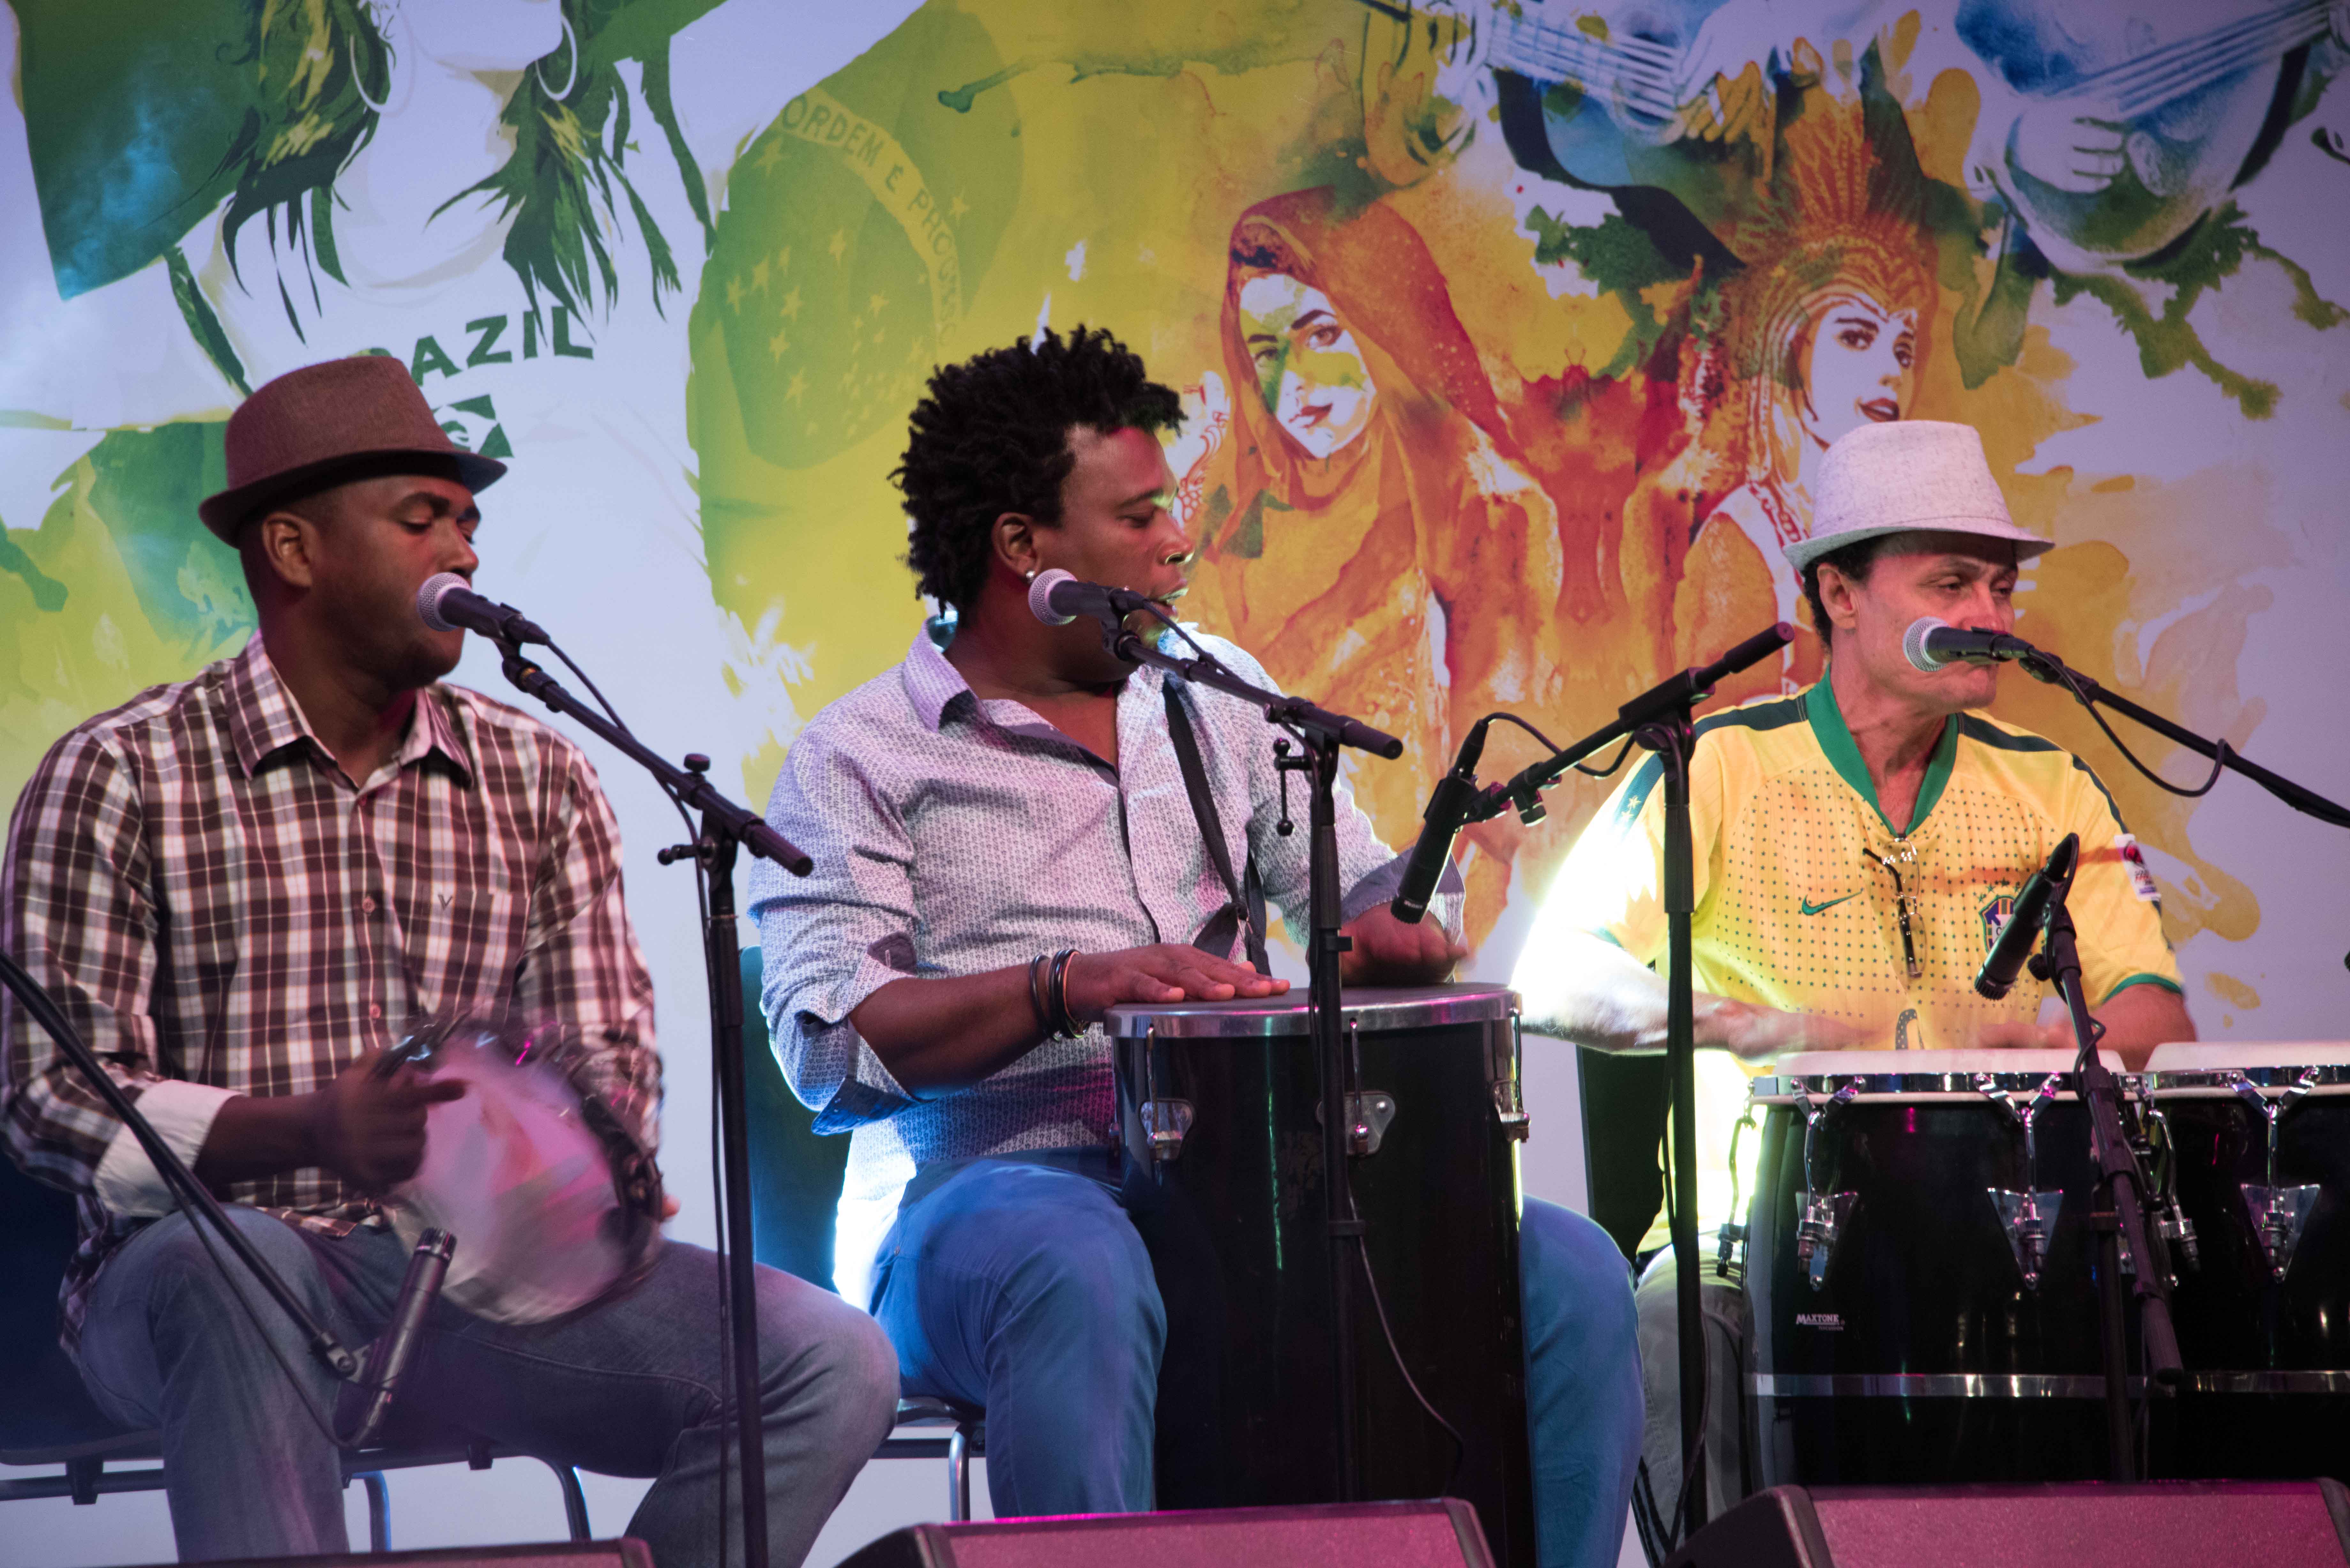 Three men seated on stage playing drums, with a colourful background during the Brazil festival in Qatar.